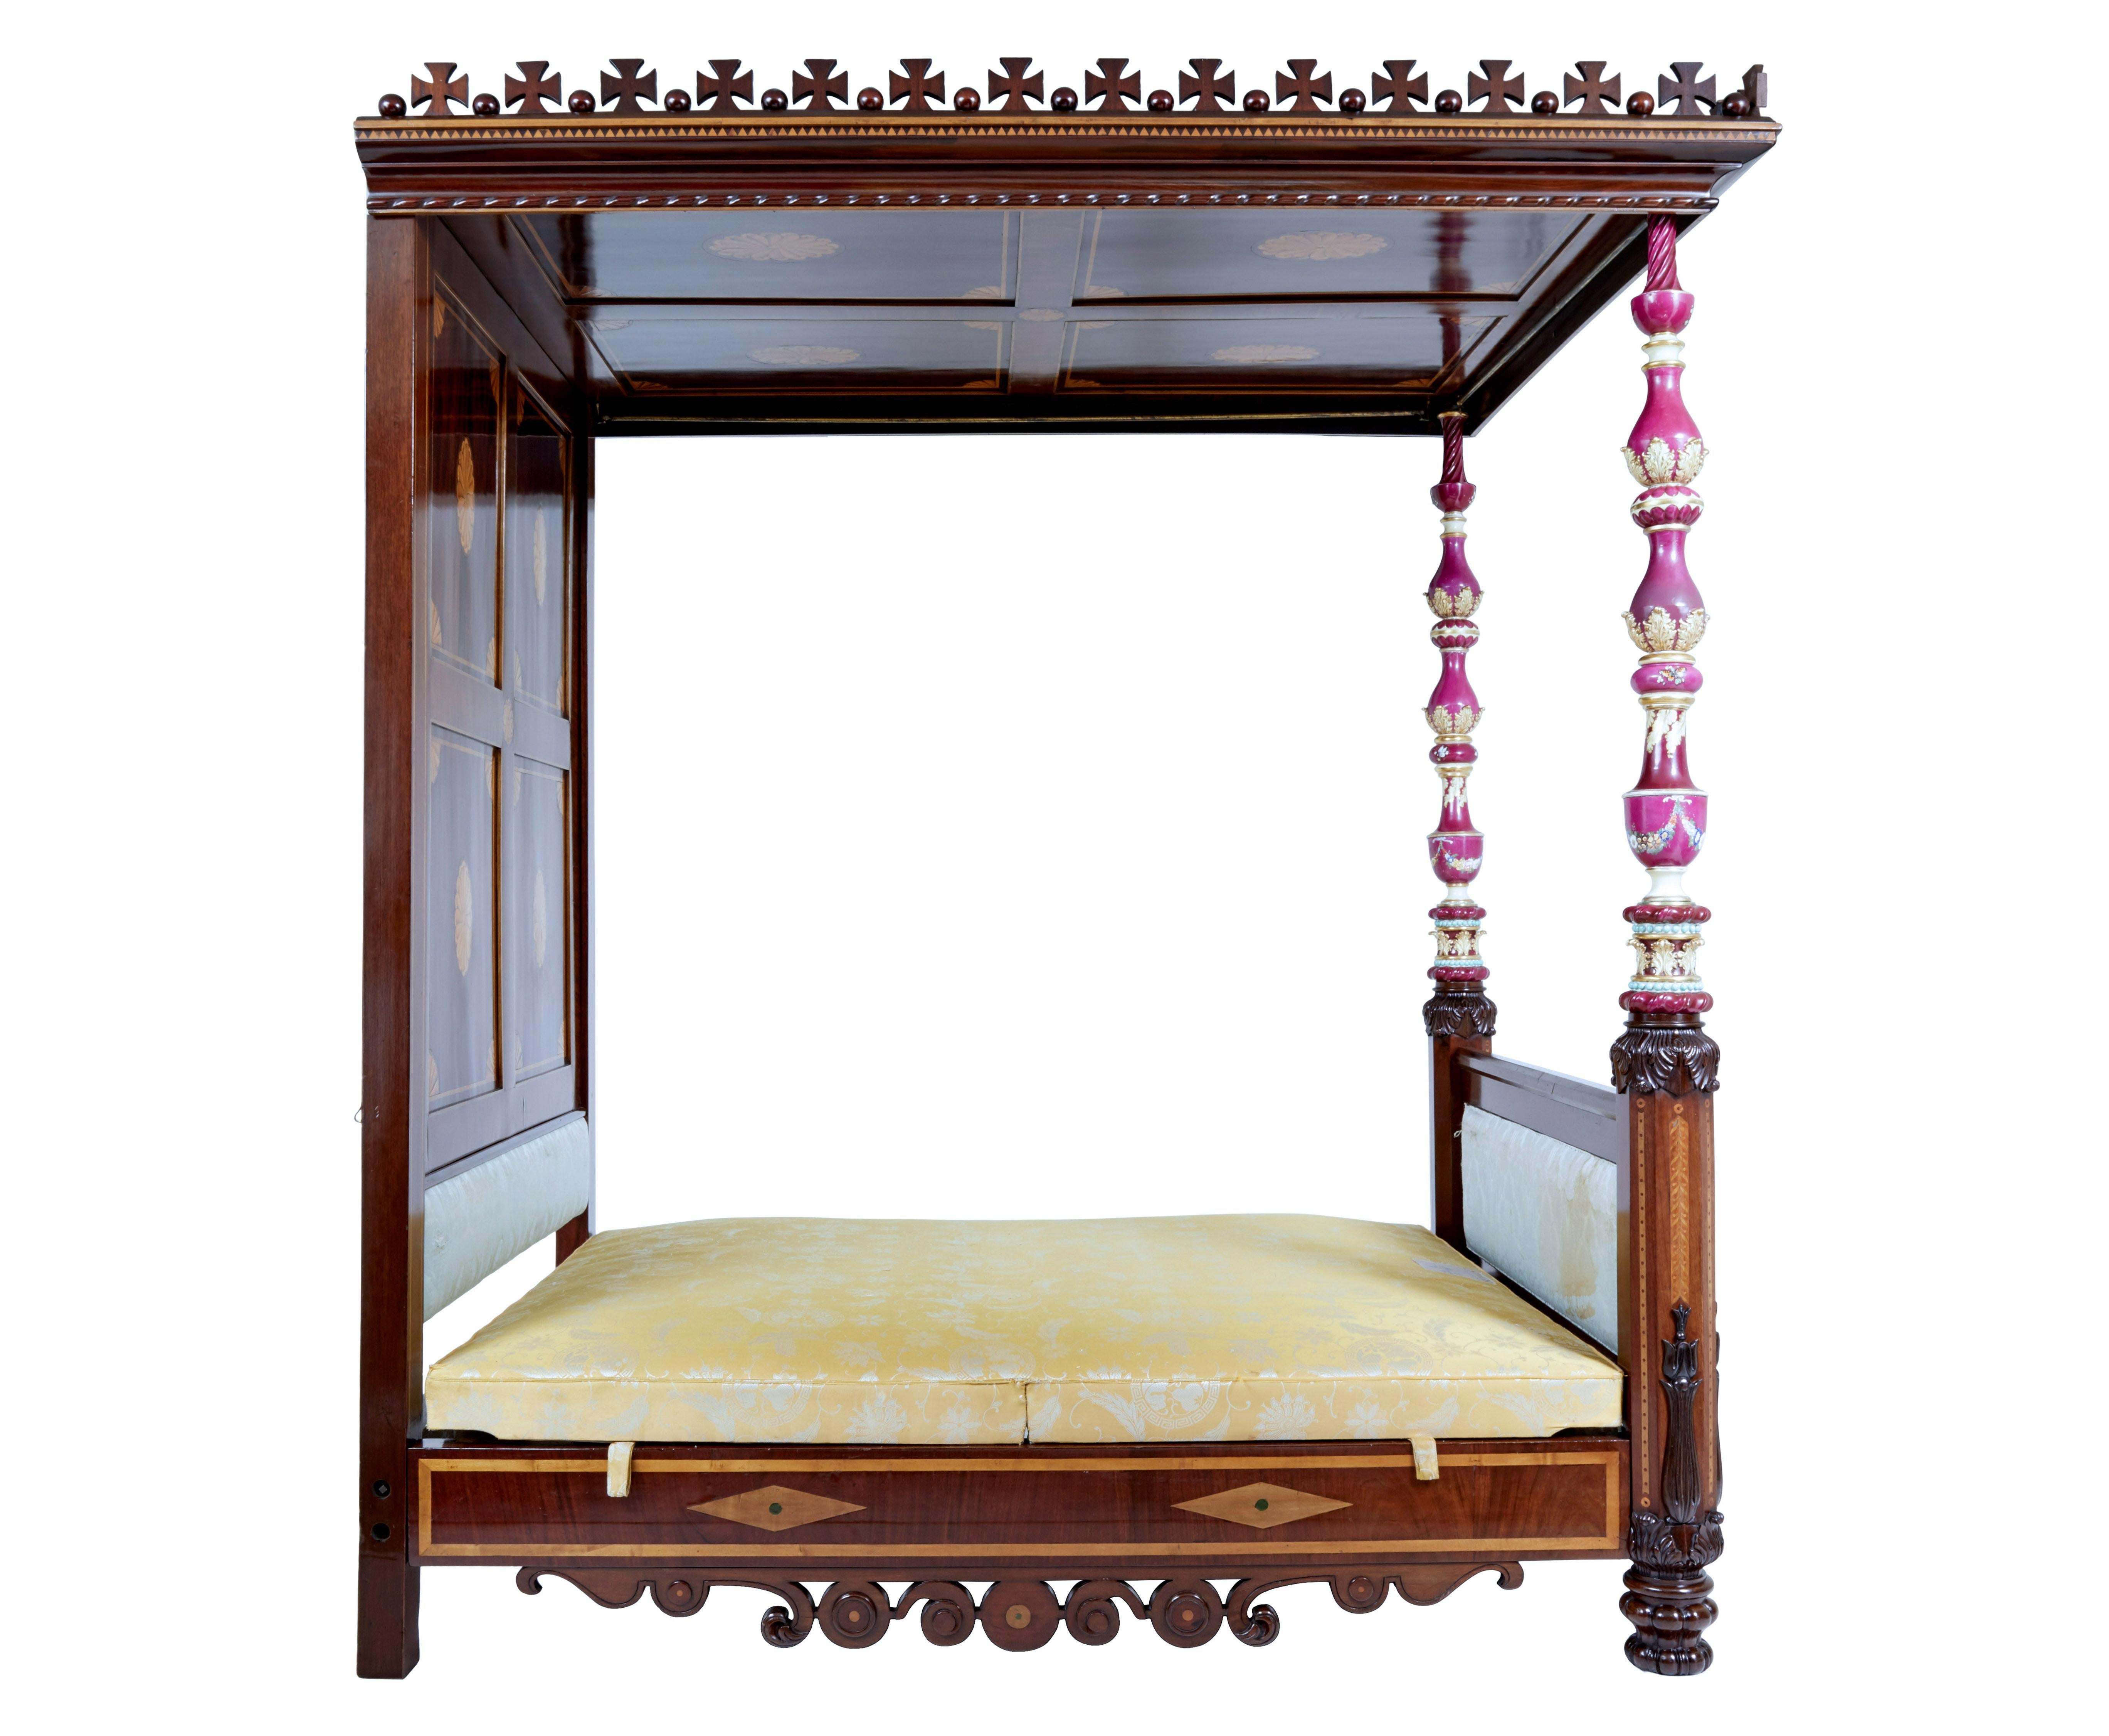 Rare 19th Century Mahogany and Porcelain 4 Poster Bed In Good Condition For Sale In Debenham, Suffolk